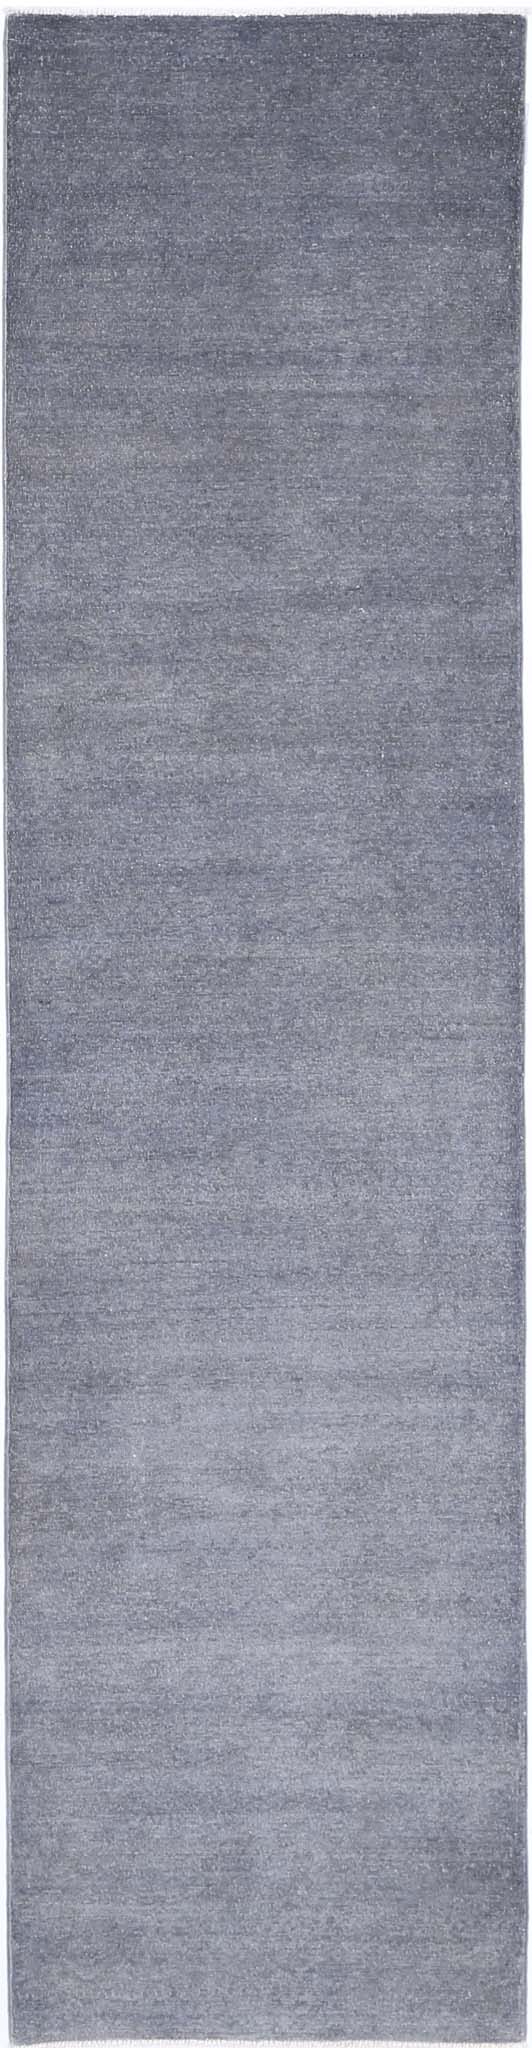 Transitional Hand Knotted Overdyed Tabriz Wool Rug of Size 2'4'' X 10'0'' in Grey and Grey Colors - Made in Afghanistan